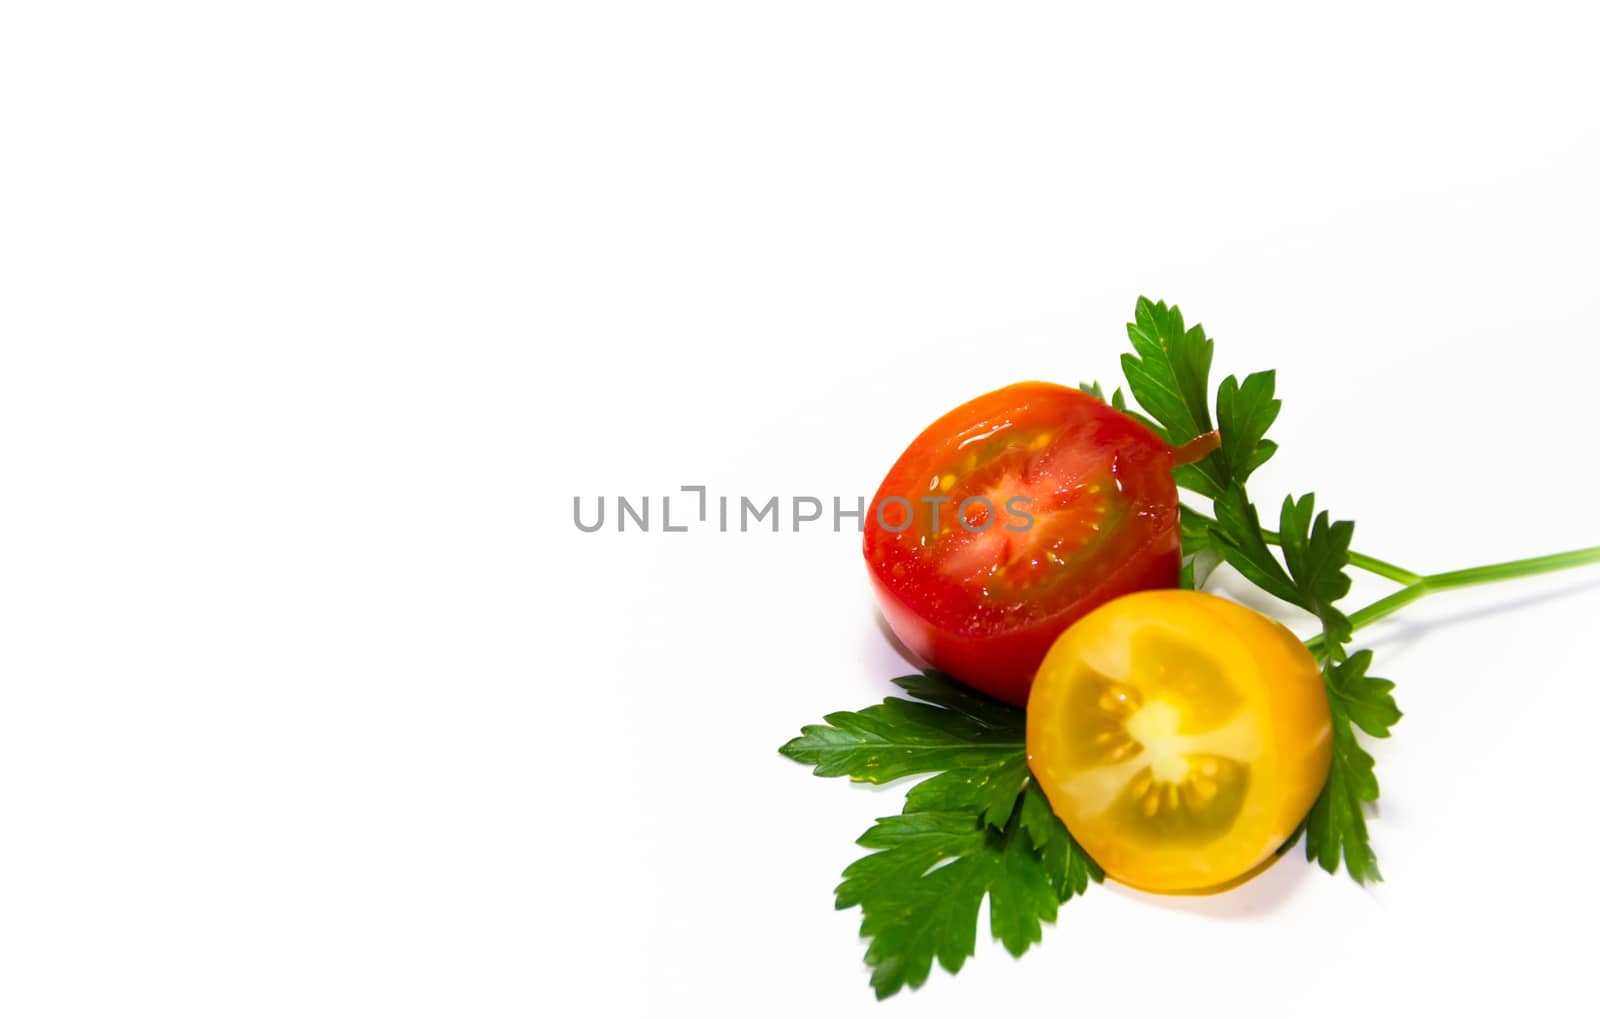 red and yellow cherry tomatoes on white background